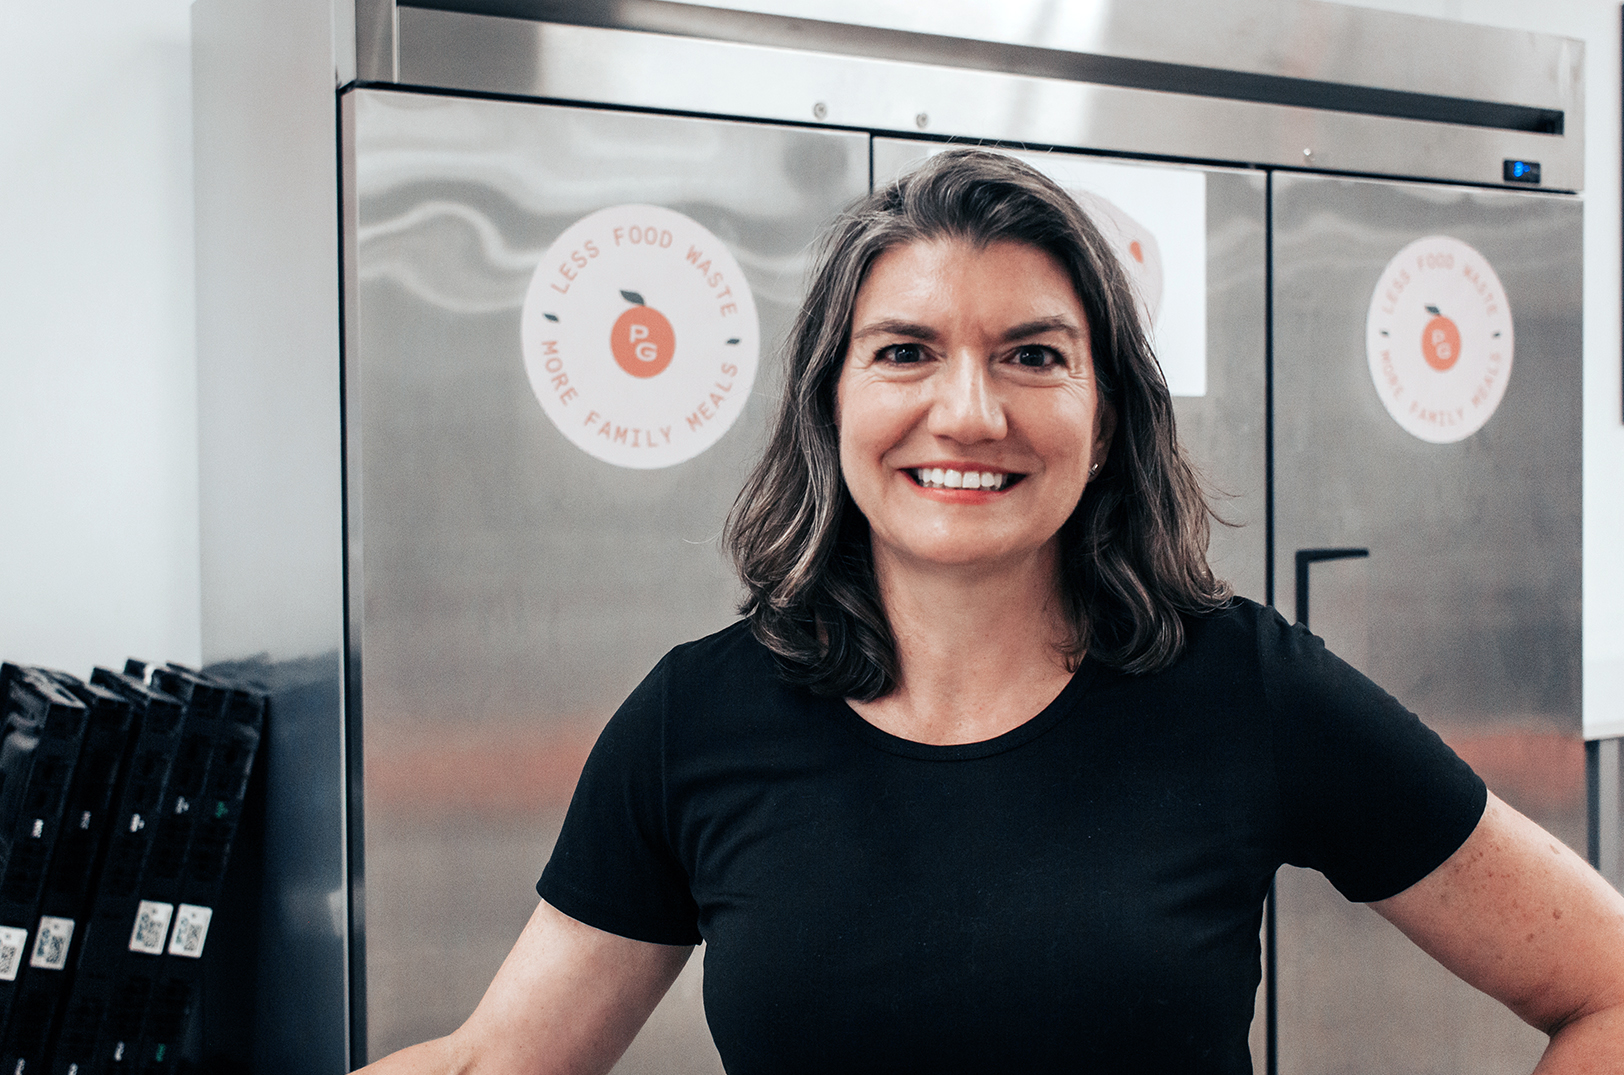 She sends food to the dinner table, instead of the trash can; how one social venture is saving family mealtime with would-be waste